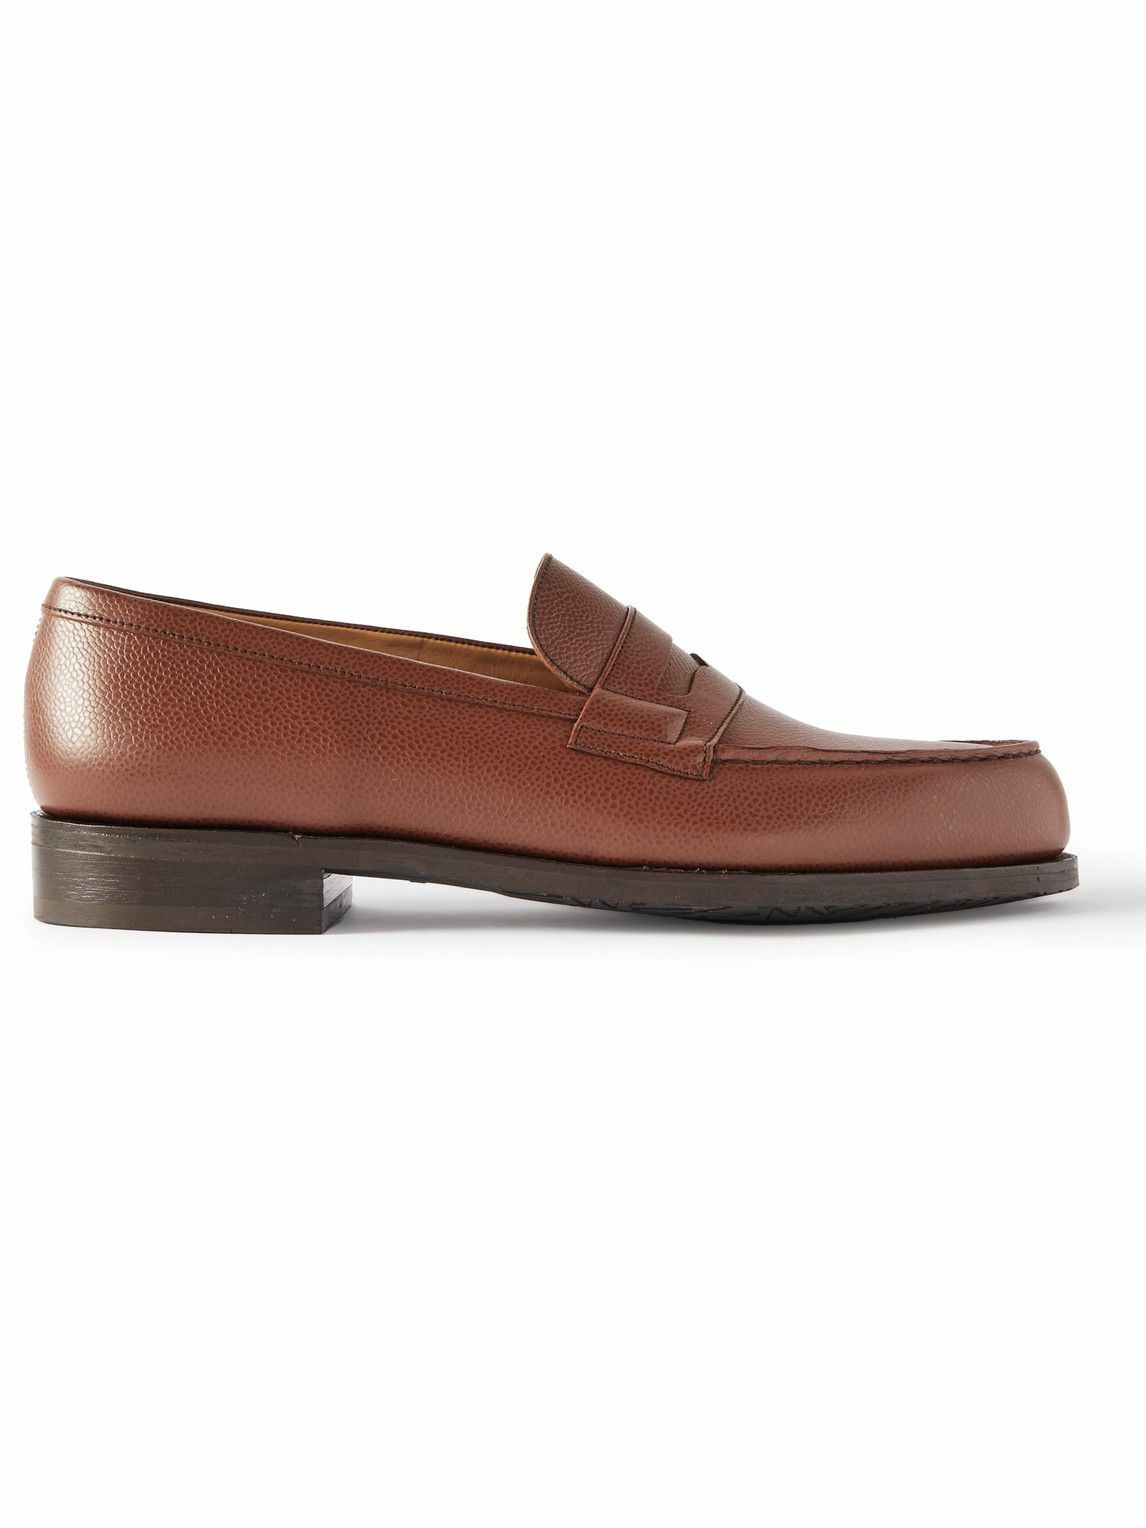 J.M. Weston - Leather Penny Loafers - Brown J.M. Weston